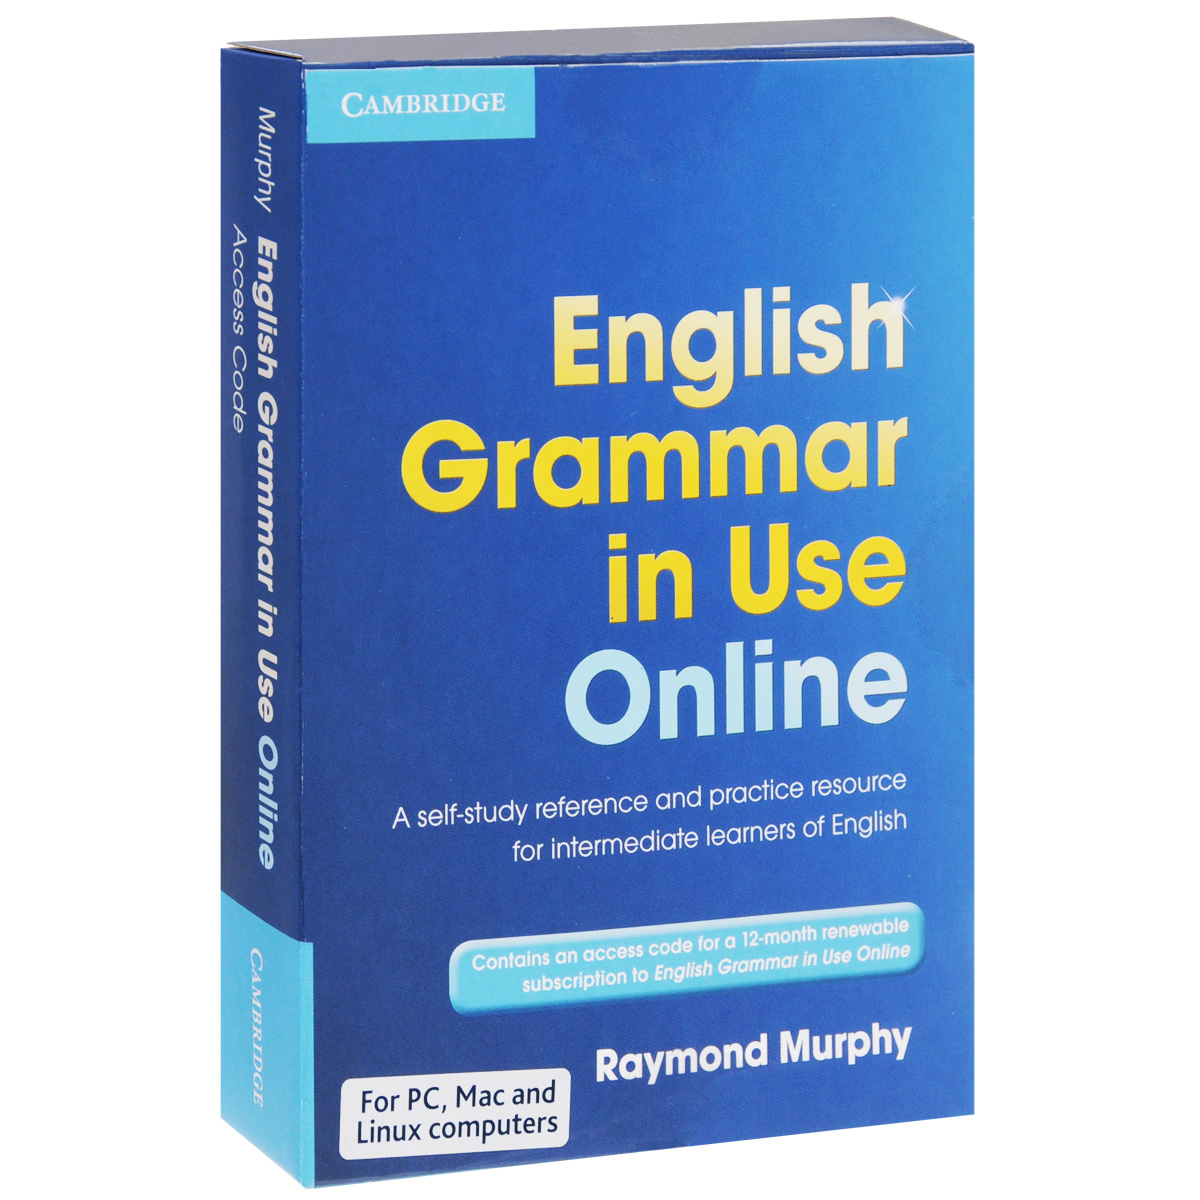 English Grammar in Use Online: Access Code: A Self-Study Reference And Practice Resource for Intermediate Learners of English